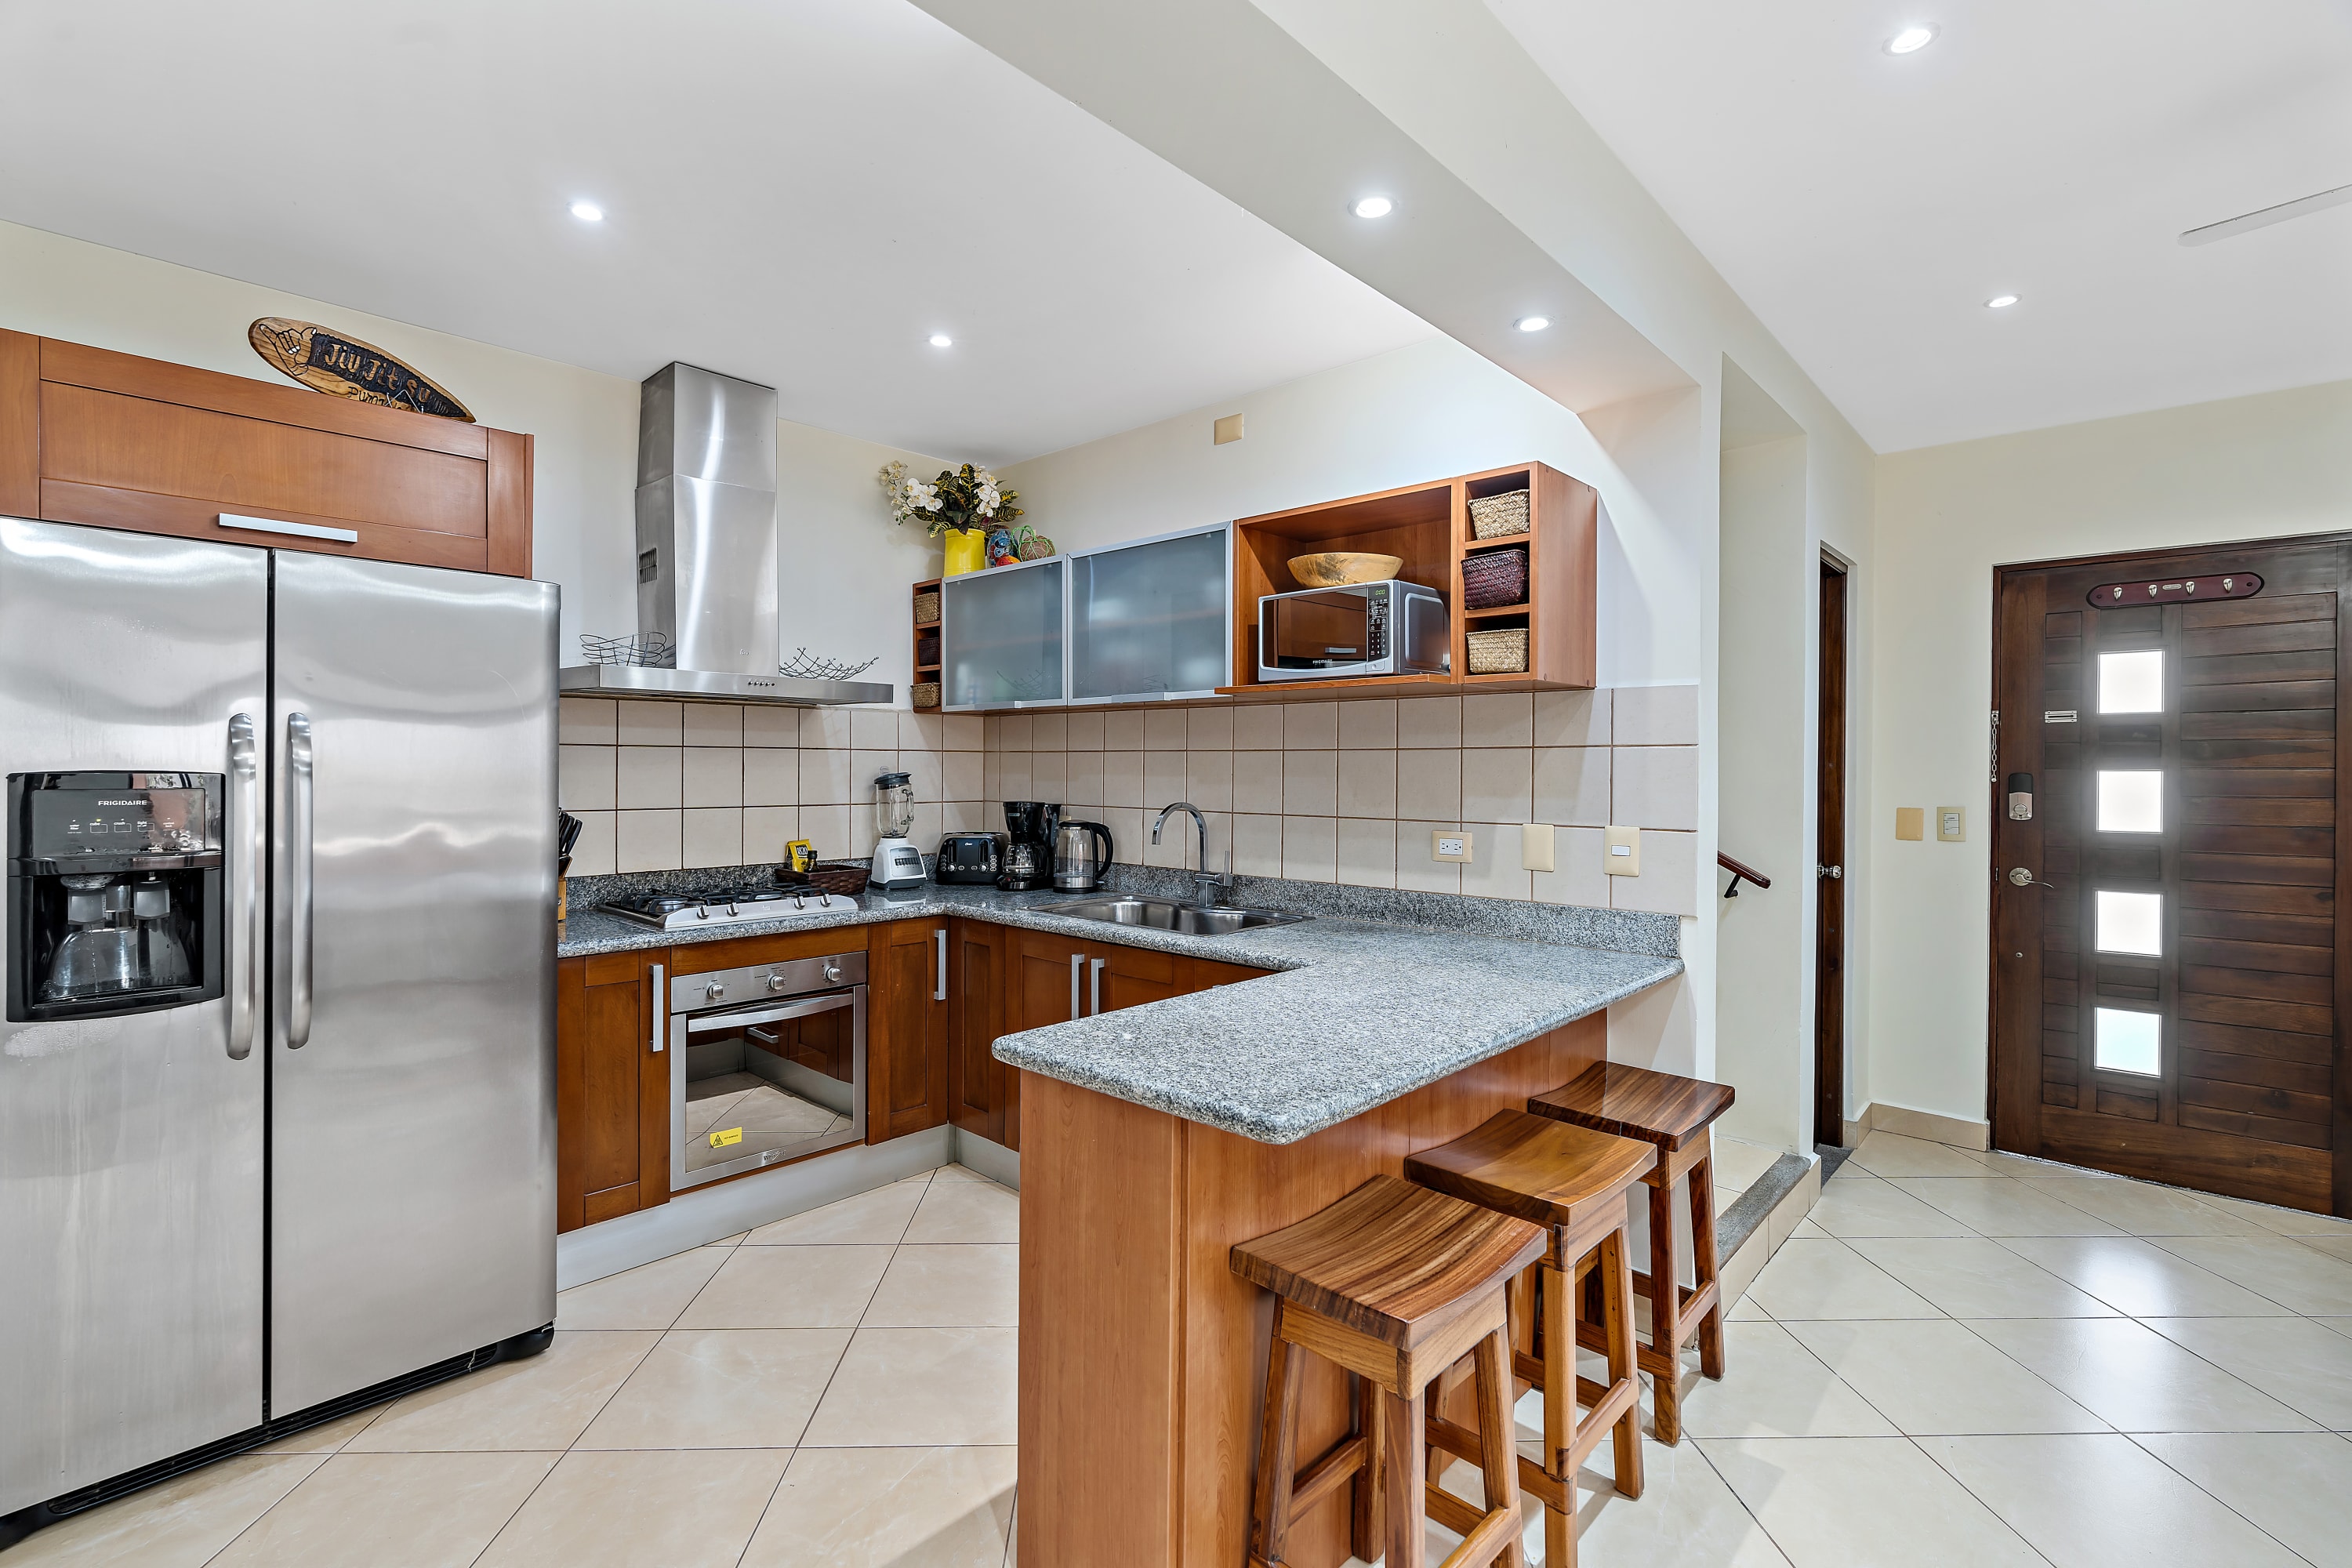 Spacious fully equipped kitchen